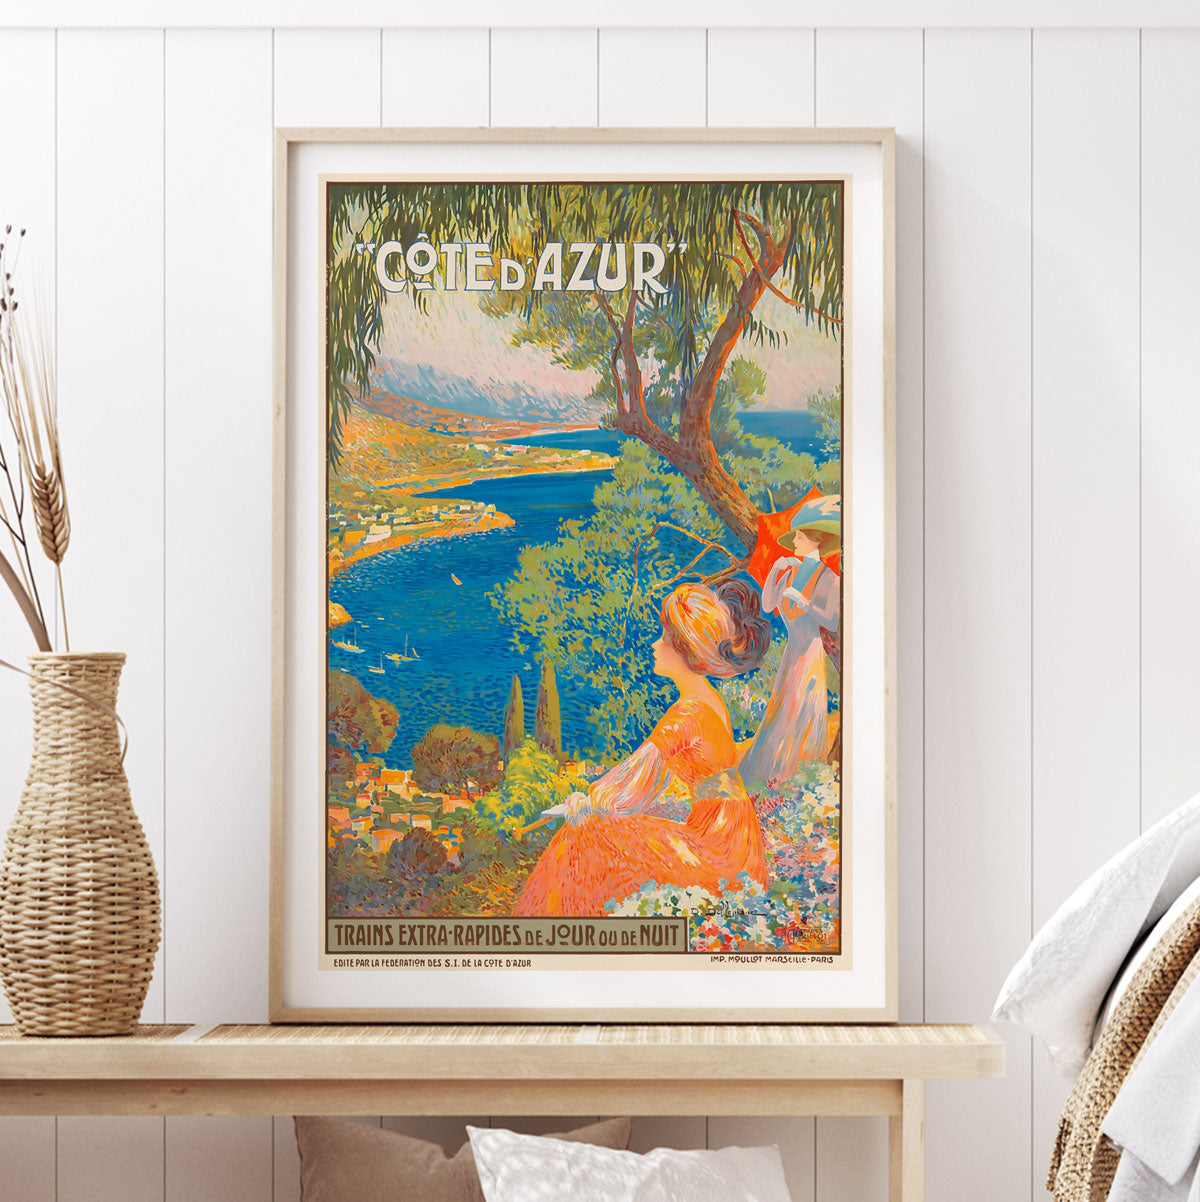 Cote d' Azure vintage retro travel advertising poster from Places We Luv